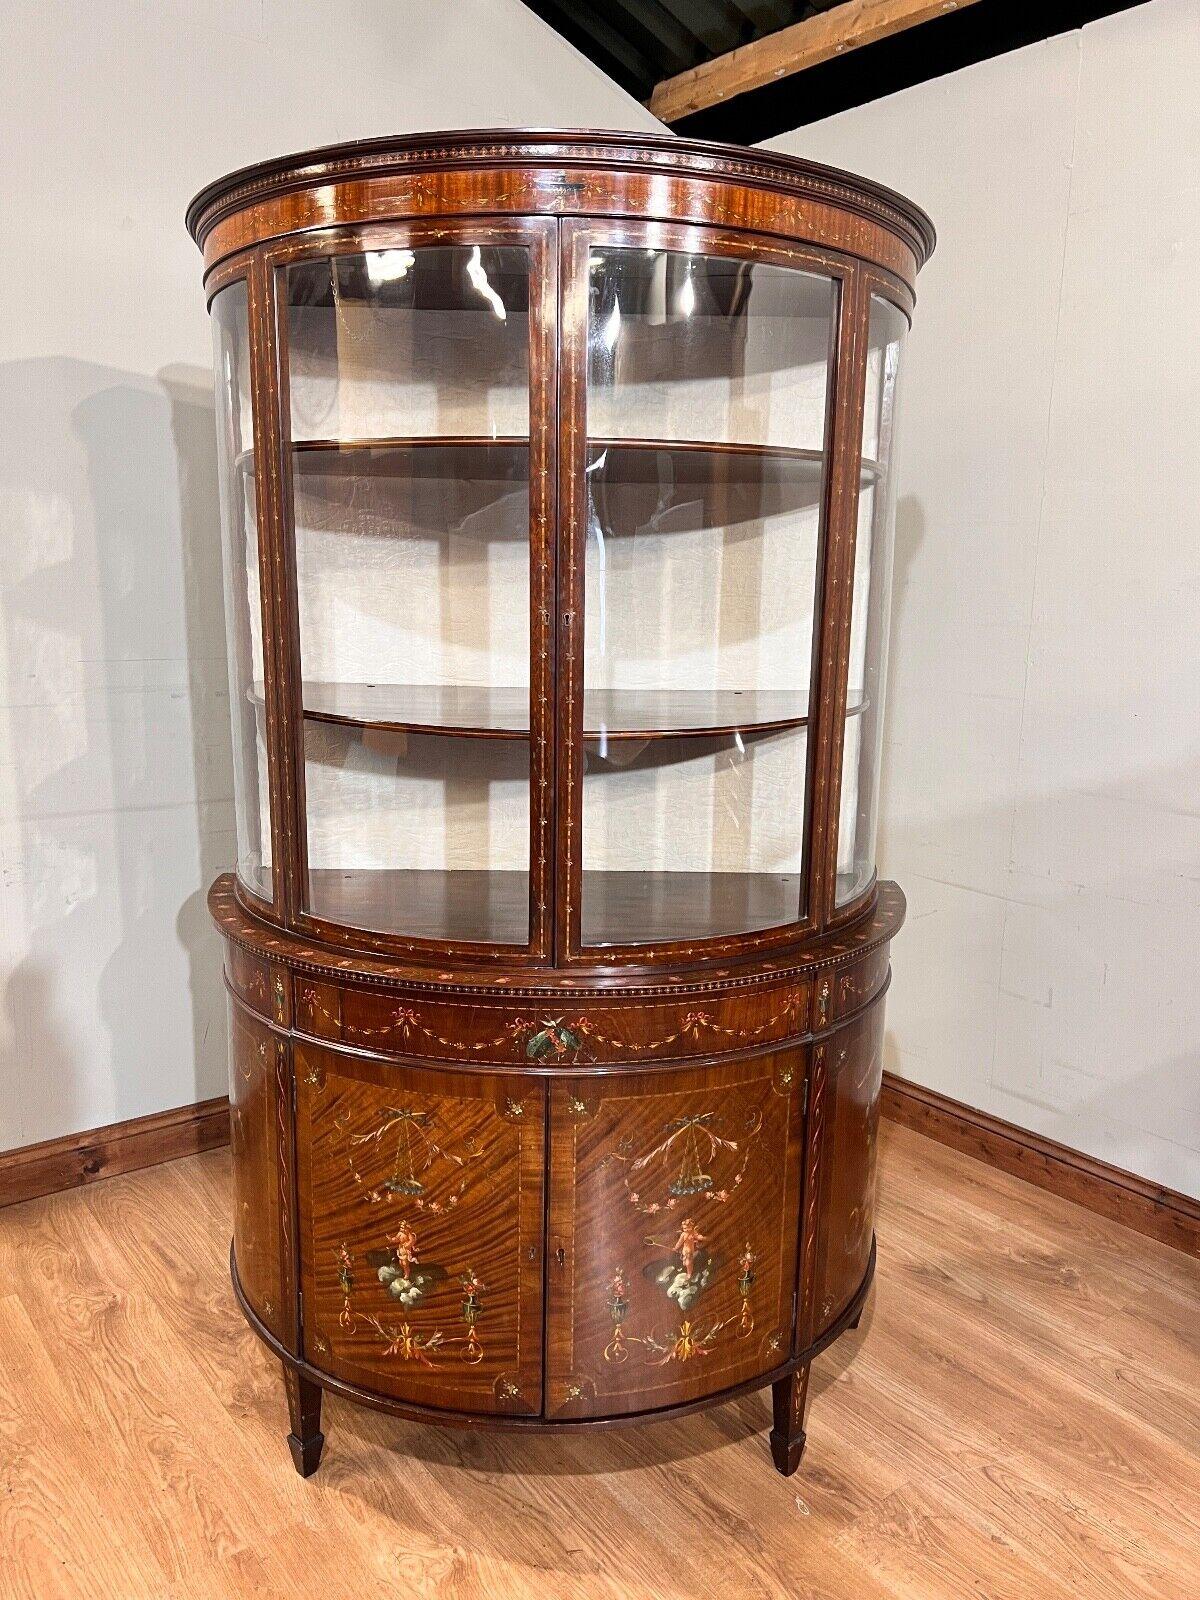 Unusual bow fronted - half round - Edwardian display cabinet
Circa 1900 on this piece which features intricate hand painted designs
Classical designs include urns, cherubs, sashes and garlands all intricately painted
Bottom opens up to reveal large